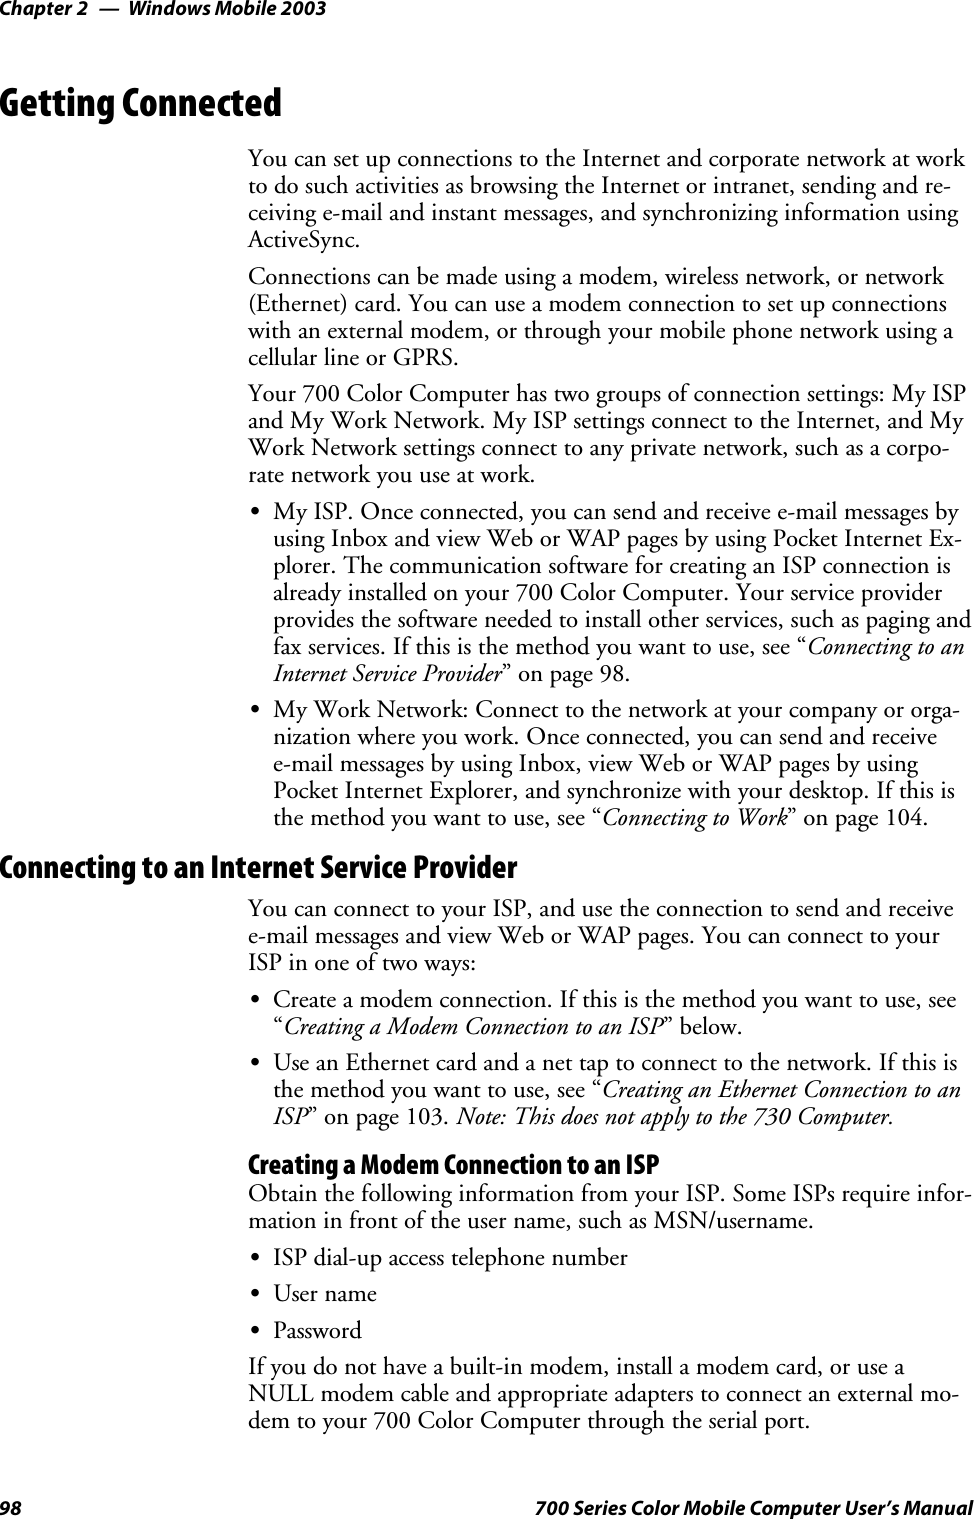 Windows Mobile 2003Chapter —298 700 Series Color Mobile Computer User’s ManualGetting ConnectedYou can set up connections to the Internet and corporate network at workto do such activities as browsing the Internet or intranet, sending and re-ceiving e-mail and instant messages, and synchronizing information usingActiveSync.Connections can be made using a modem, wireless network, or network(Ethernet) card. You can use a modem connection to set up connectionswith an external modem, or through your mobile phone network using acellular line or GPRS.Your 700 Color Computer has two groups of connection settings: My ISPand My Work Network. My ISP settings connect to the Internet, and MyWork Network settings connect to any private network, such as a corpo-rate network you use at work.SMy ISP. Once connected, you can send and receive e-mail messages byusing Inbox and view Web or WAP pages by using Pocket Internet Ex-plorer. The communication software for creating an ISP connection isalready installed on your 700 Color Computer. Your service providerprovides the software needed to install other services, such as paging andfax services. If this is the method you want to use, see “Connecting to anInternet Service Provider” on page 98.SMy Work Network: Connect to the network at your company or orga-nization where you work. Once connected, you can send and receivee-mail messages by using Inbox, view Web or WAP pages by usingPocket Internet Explorer, and synchronize with your desktop. If this isthe method you want to use, see “Connecting to Work” on page 104.Connecting to an Internet Service ProviderYou can connect to your ISP, and use the connection to send and receivee-mail messages and view Web or WAP pages. You can connect to yourISP in one of two ways:SCreate a modem connection. If this is the method you want to use, see“Creating a Modem Connection to an ISP”below.SUse an Ethernet card and a net tap to connect to the network. If this isthe method you want to use, see “Creating an Ethernet Connection to anISP” on page 103. Note: This does not apply to the 730 Computer.Creating a Modem Connection to an ISPObtain the following information from your ISP. Some ISPs require infor-mation in front of the user name, such as MSN/username.SISP dial-up access telephone numberSUser nameSPasswordIf you do not have a built-in modem, install a modem card, or use aNULL modem cable and appropriate adapters to connect an external mo-dem to your 700 Color Computer through the serial port.